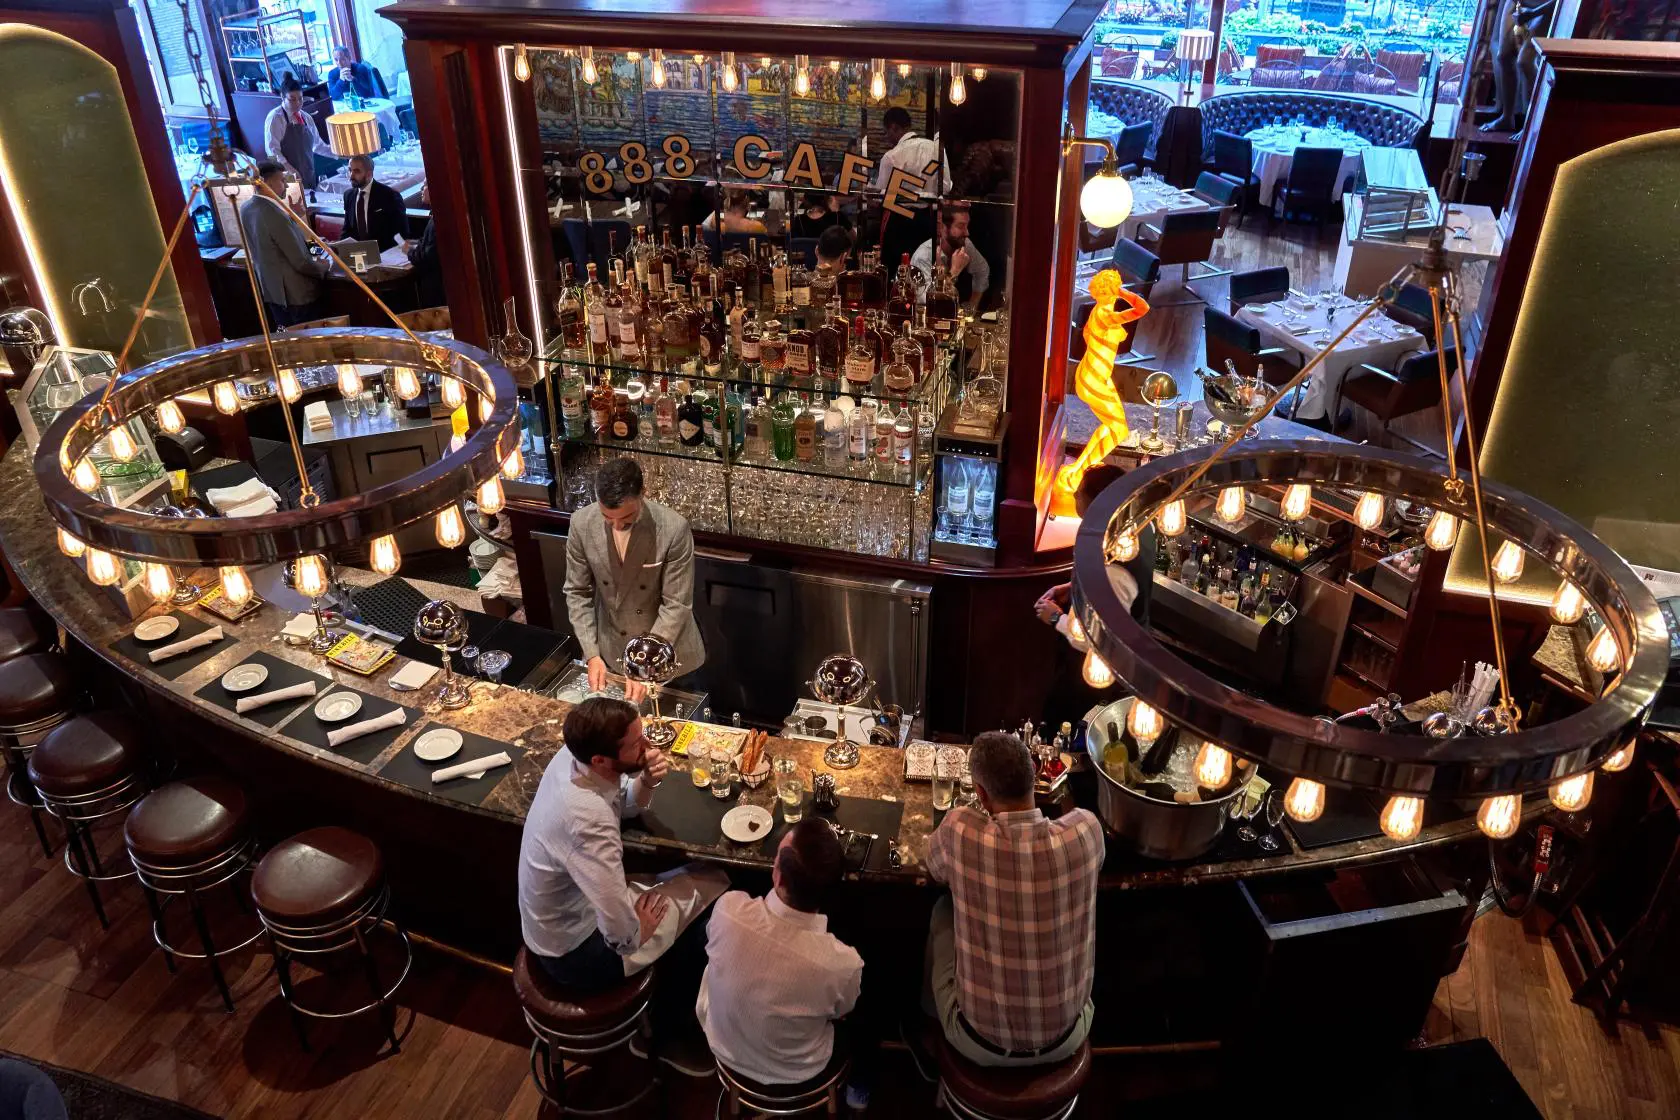 Elevated view of a bustling circular bar with patrons and bartender in a luxury atmospheric setting.